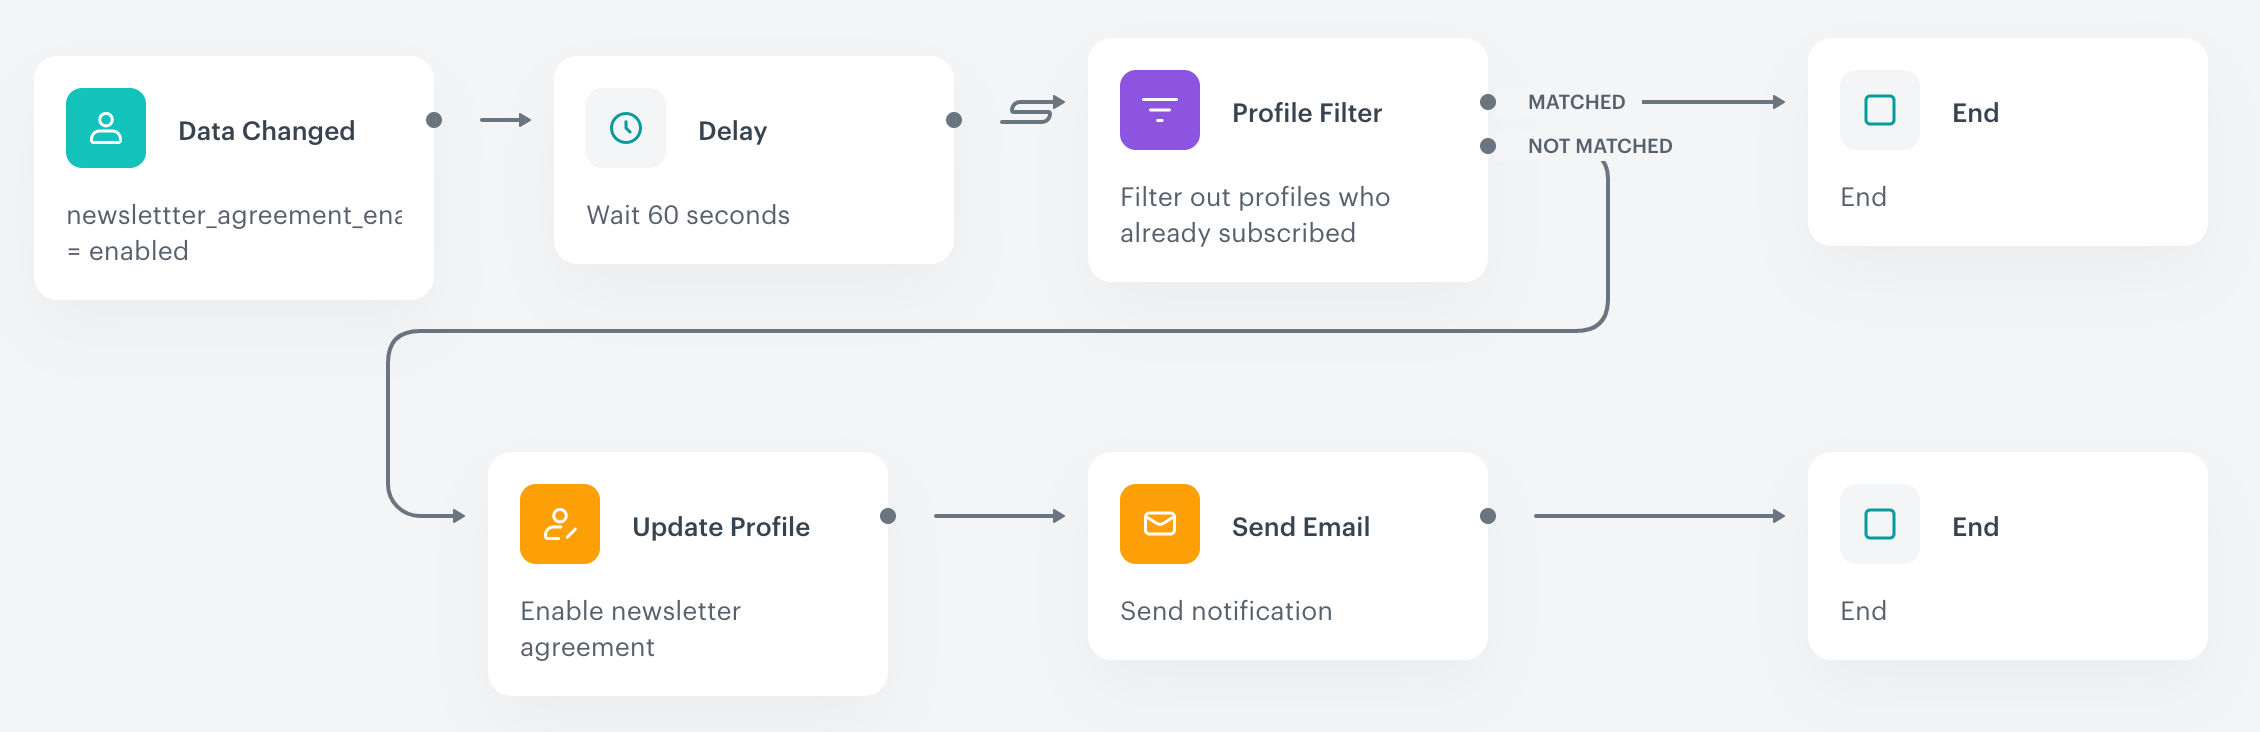 Single-opt in workflow with filter and notification